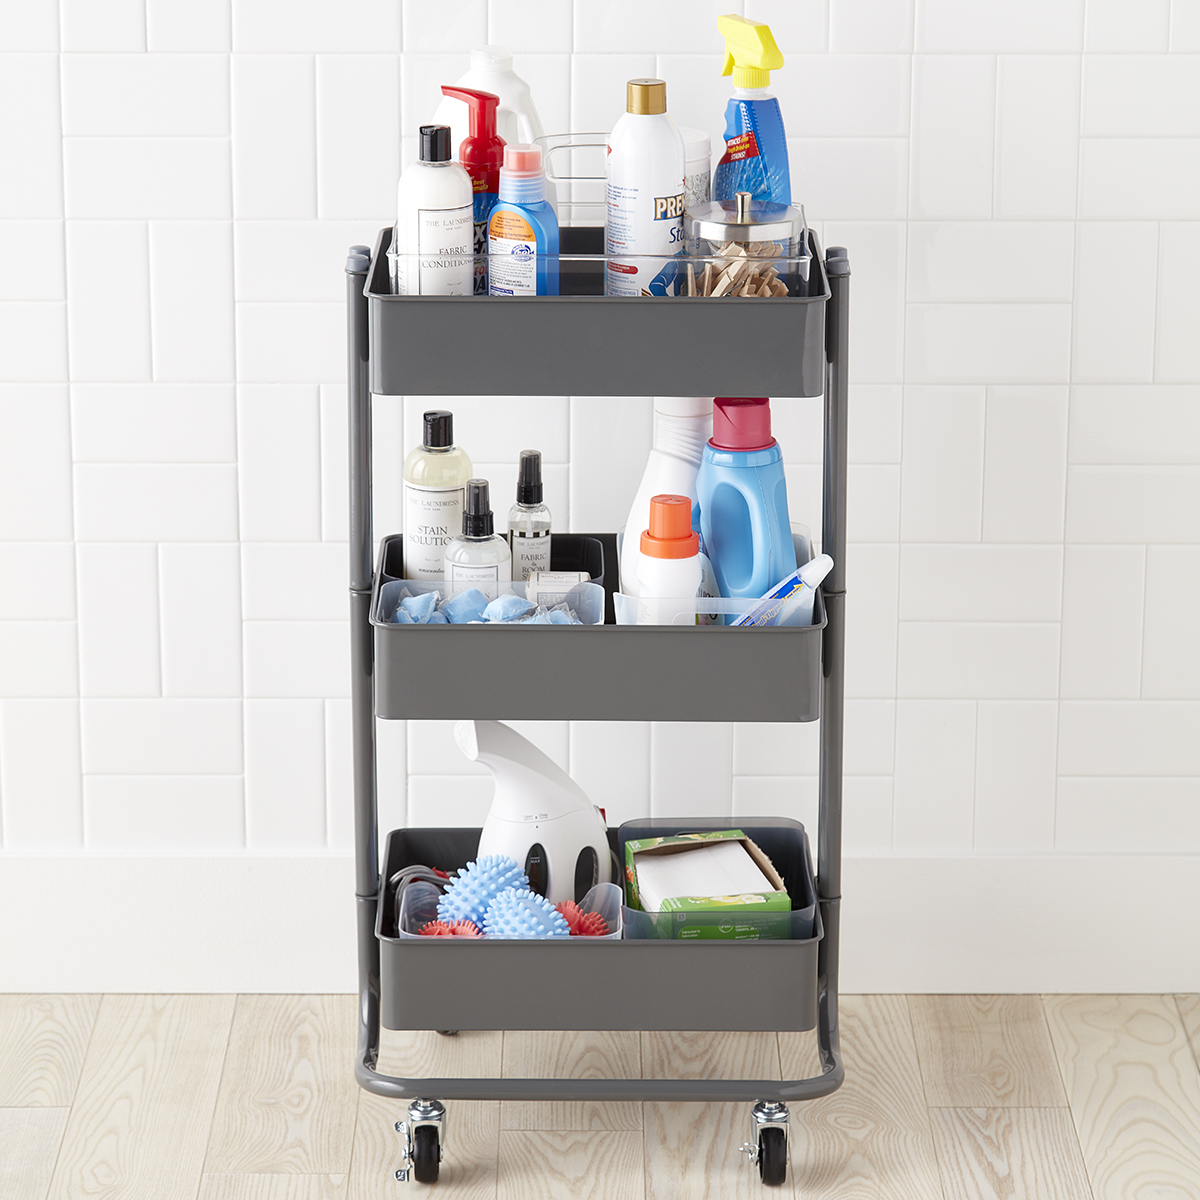 https://www.containerstore.com/catalogimages/358841/KT_19_Laundry_-Cart_RGB.jpg